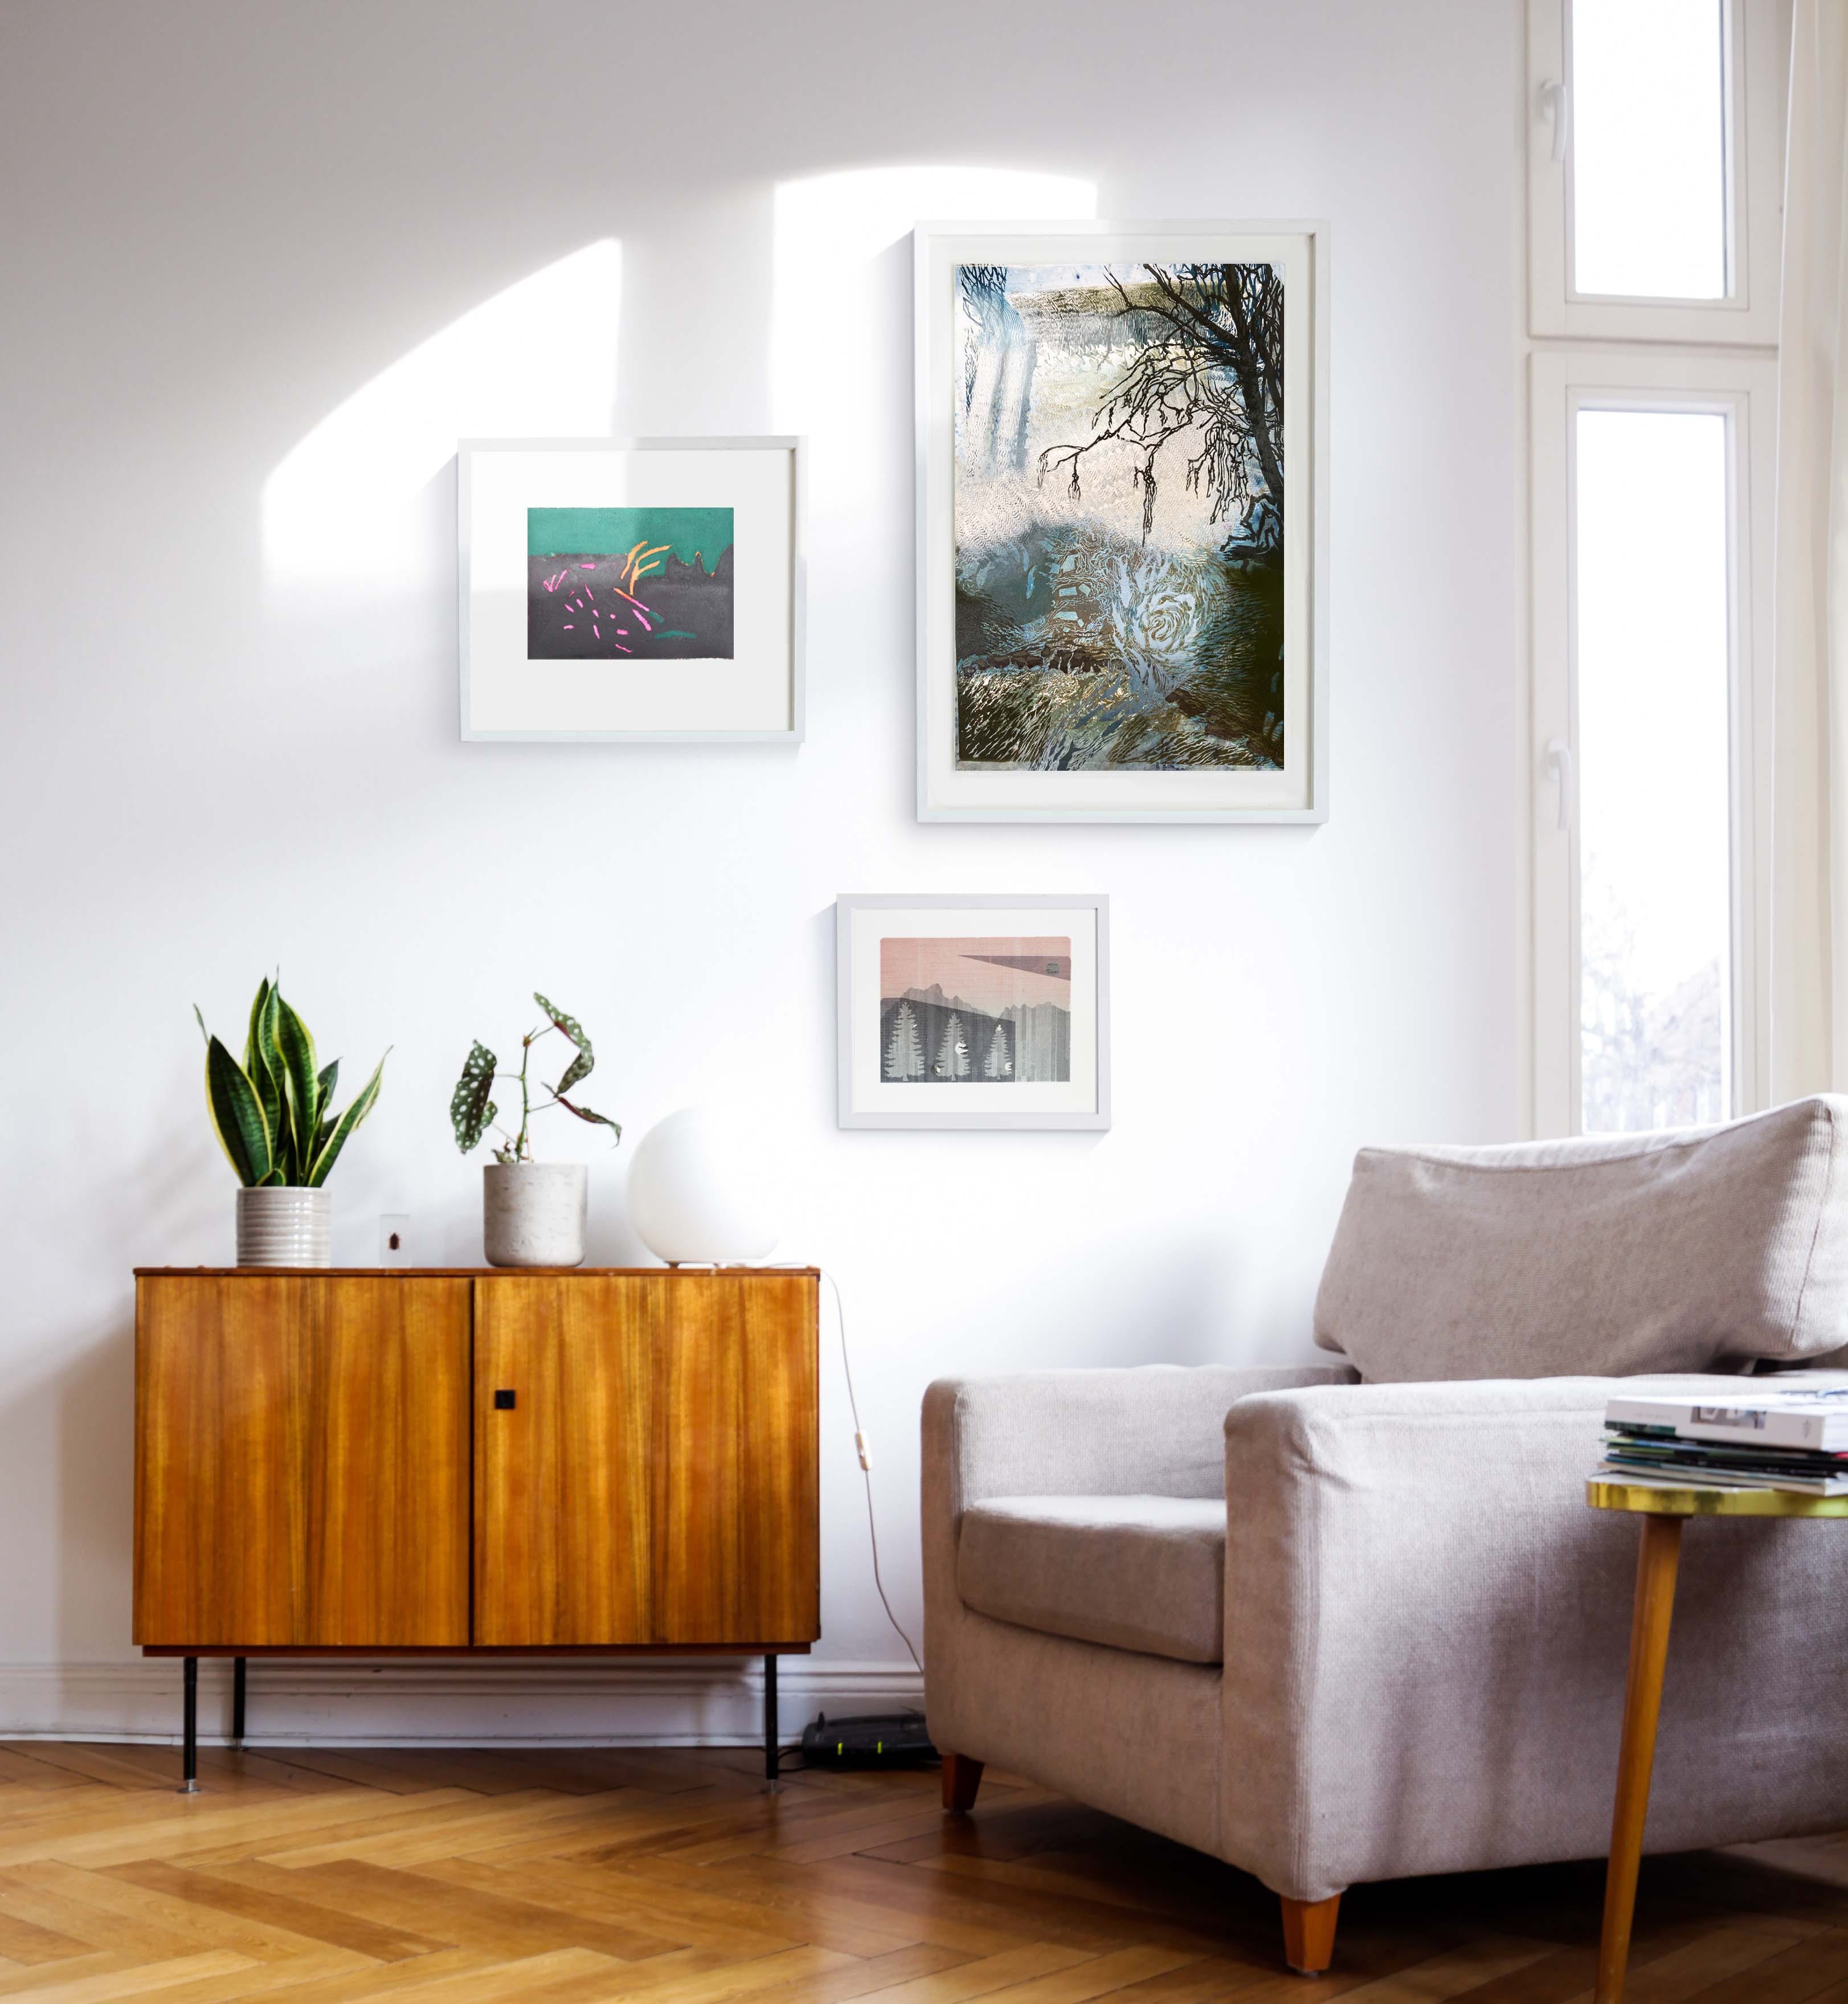 Art Gallery Displays: Maximizing Your Available Space